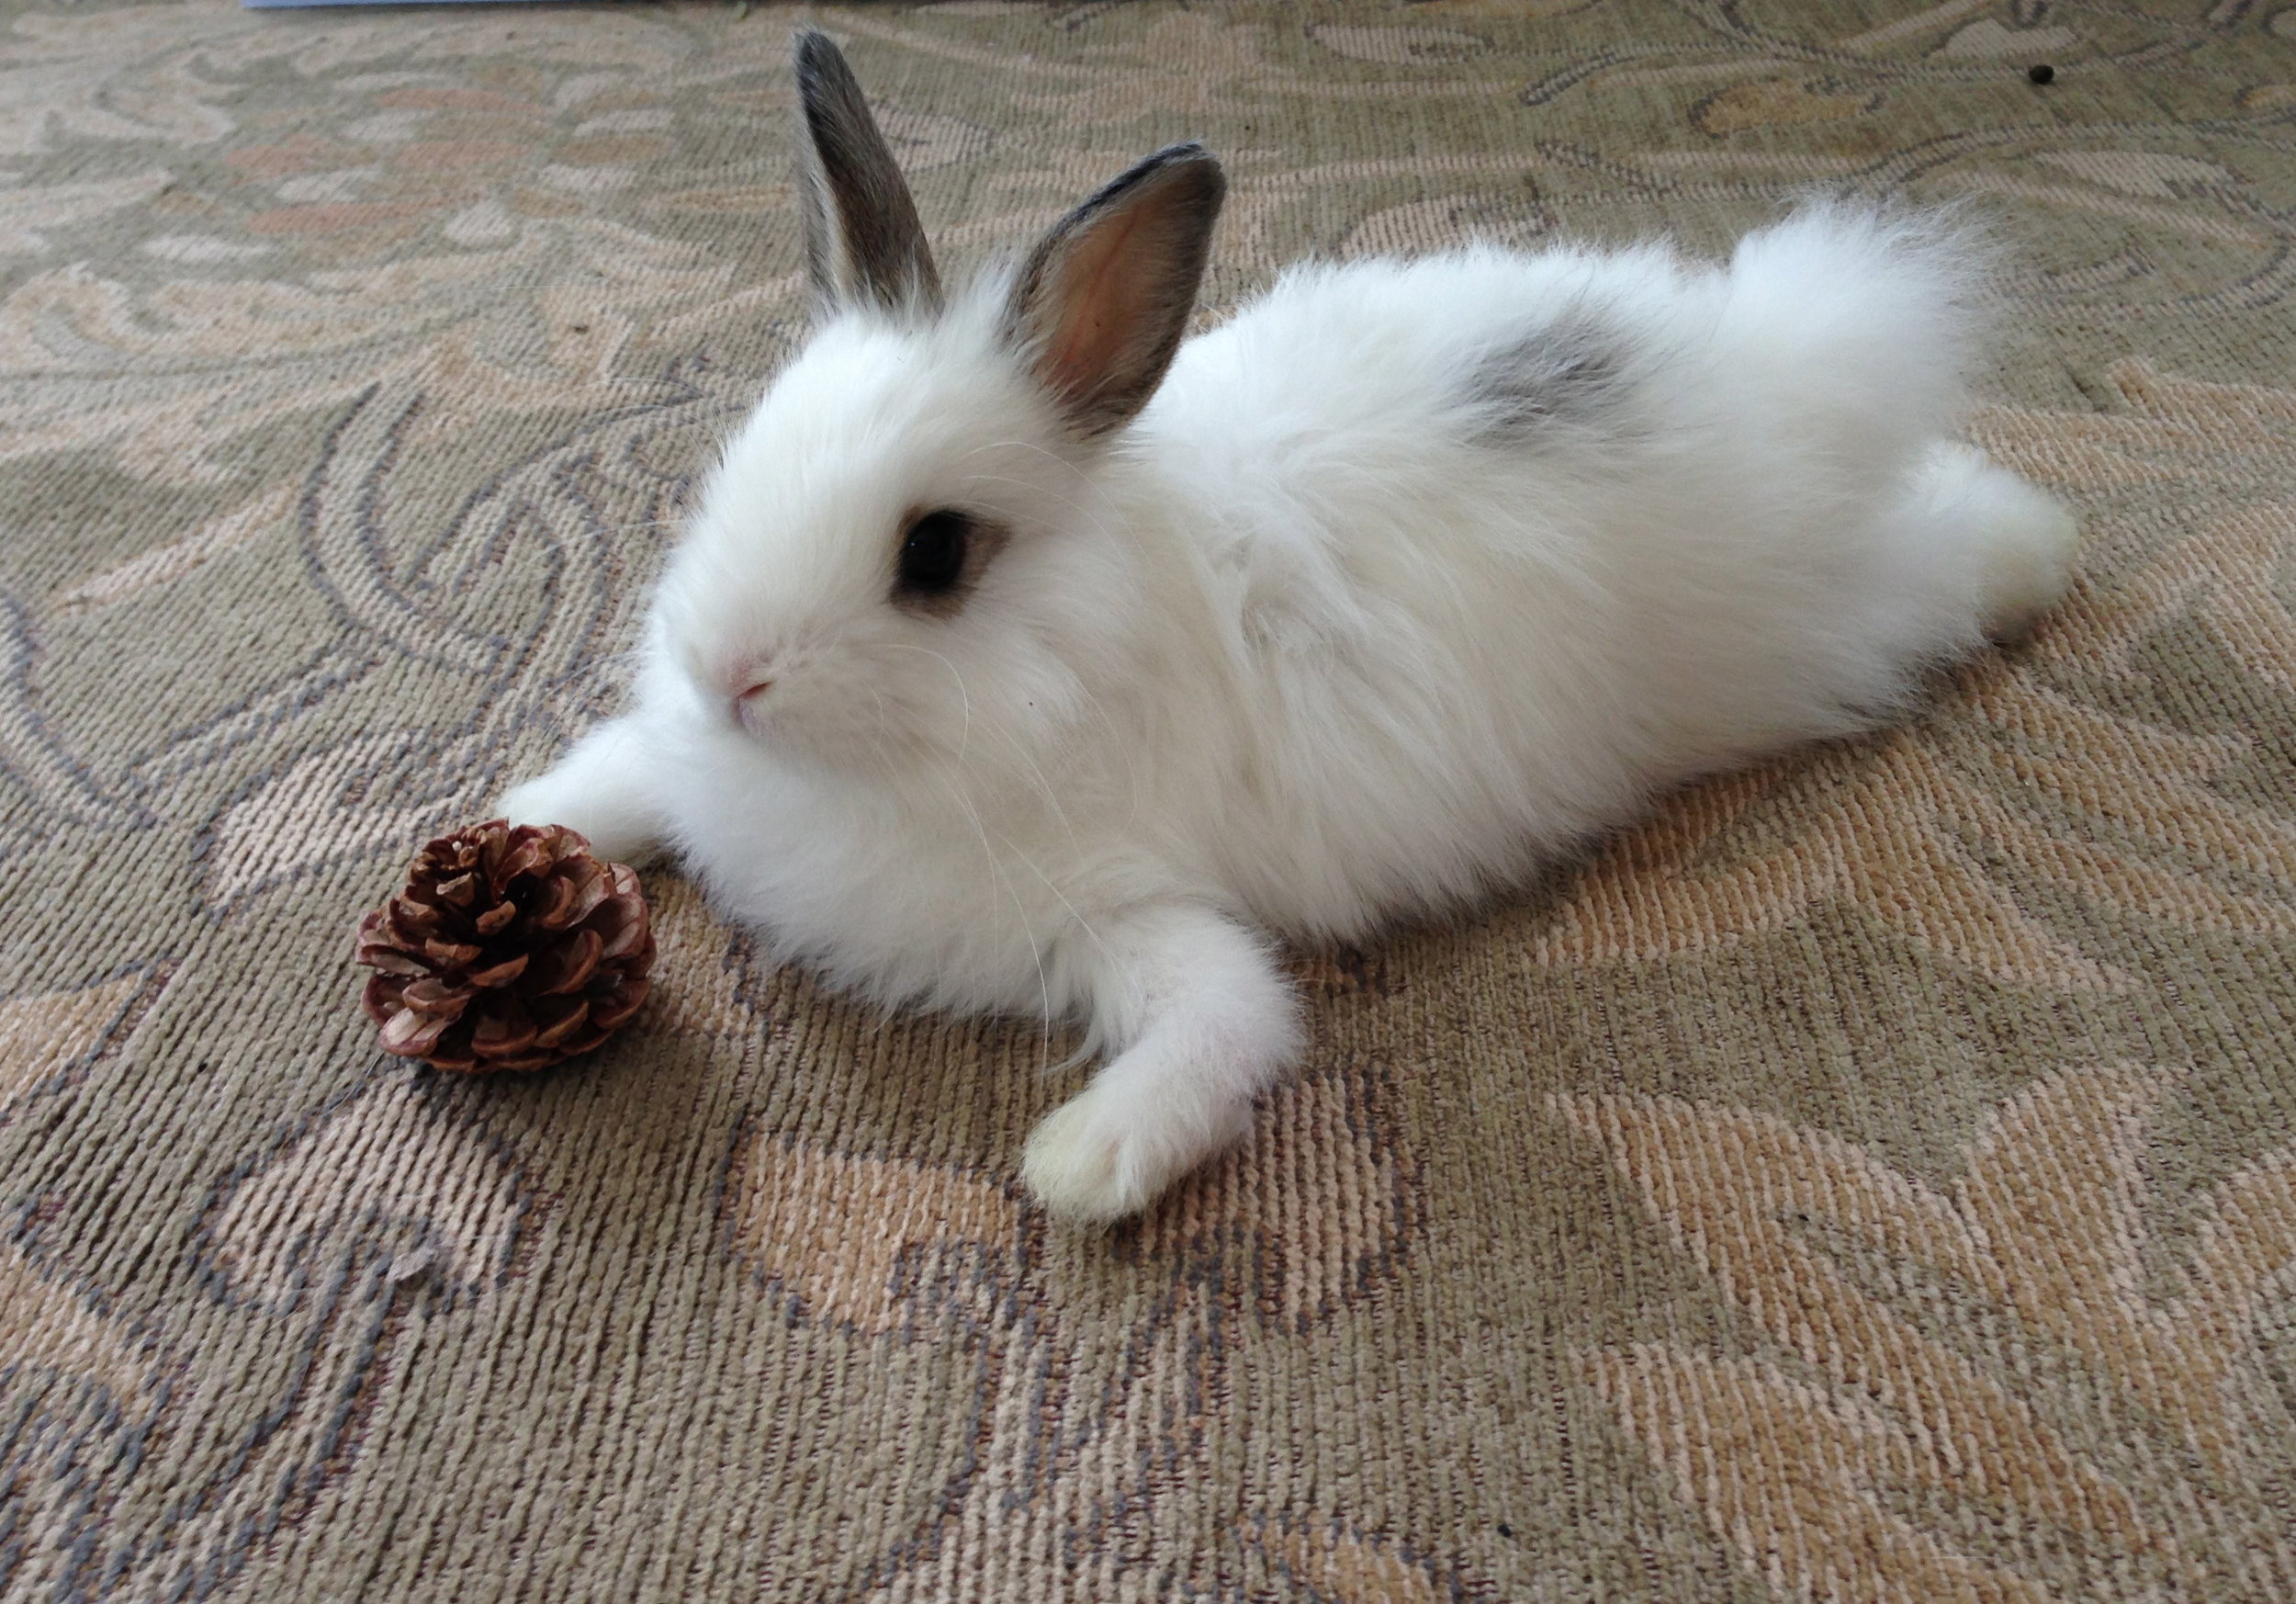 Bunny Hangs Out with Her Pinecone